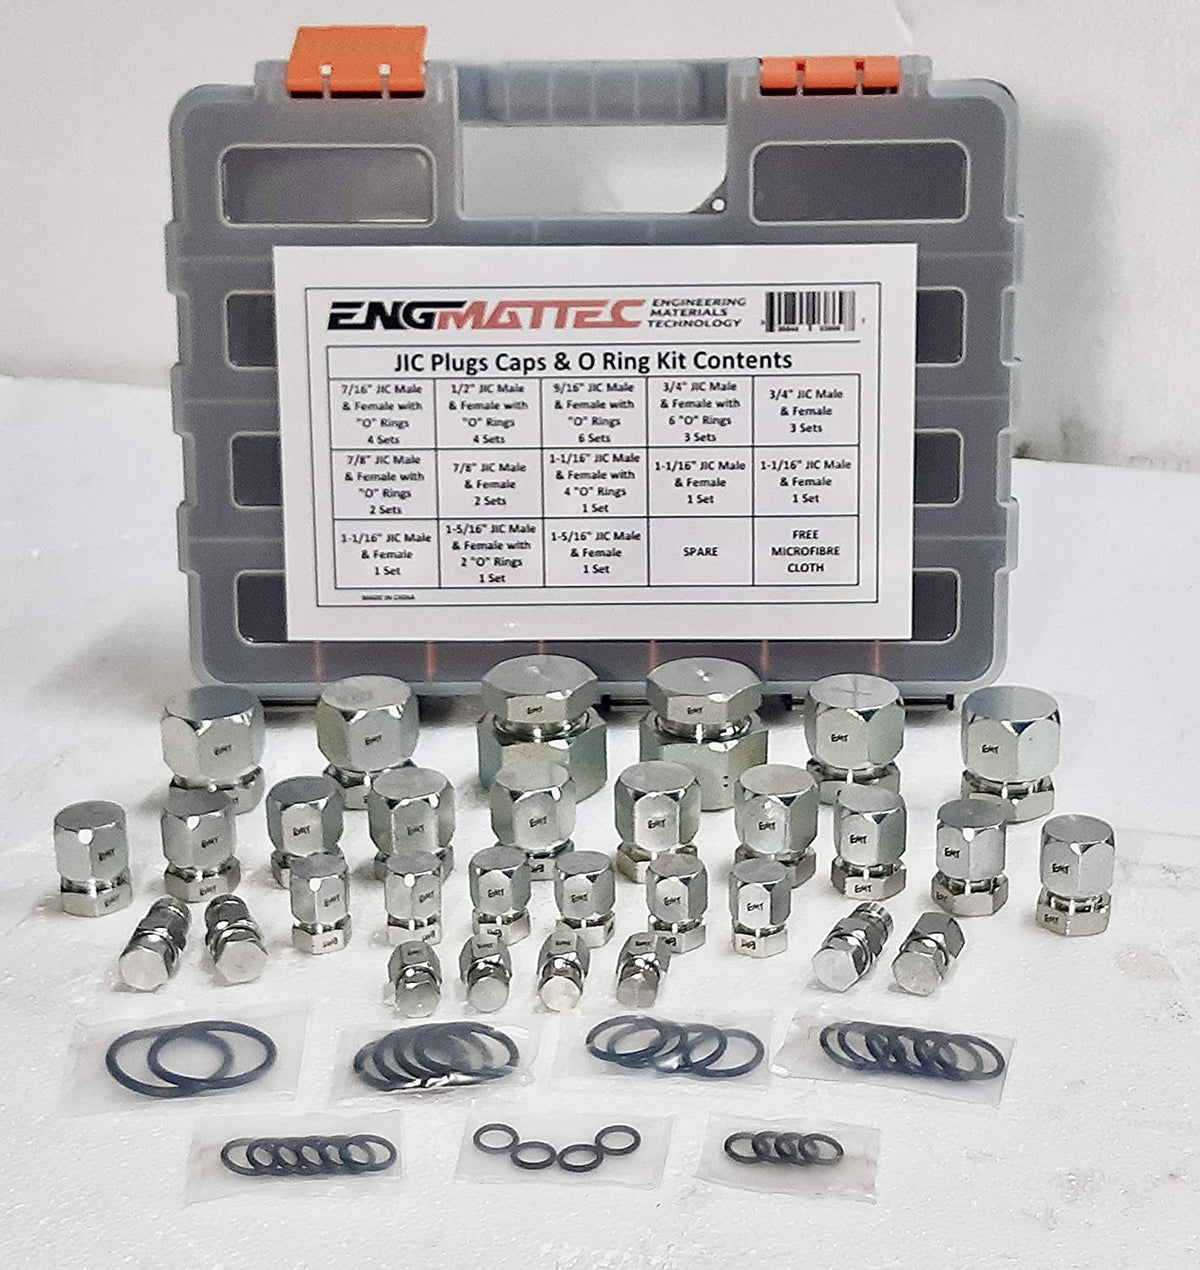 Strong and Stylish Plastic Parts tray with 7 different sizes of Steel JIC Plugs, Caps &amp; Nitrile O-Rings 92 pieces in total used stop hydraulic oil leaks and external contamination during hydraulic equipment maintenance and repair 